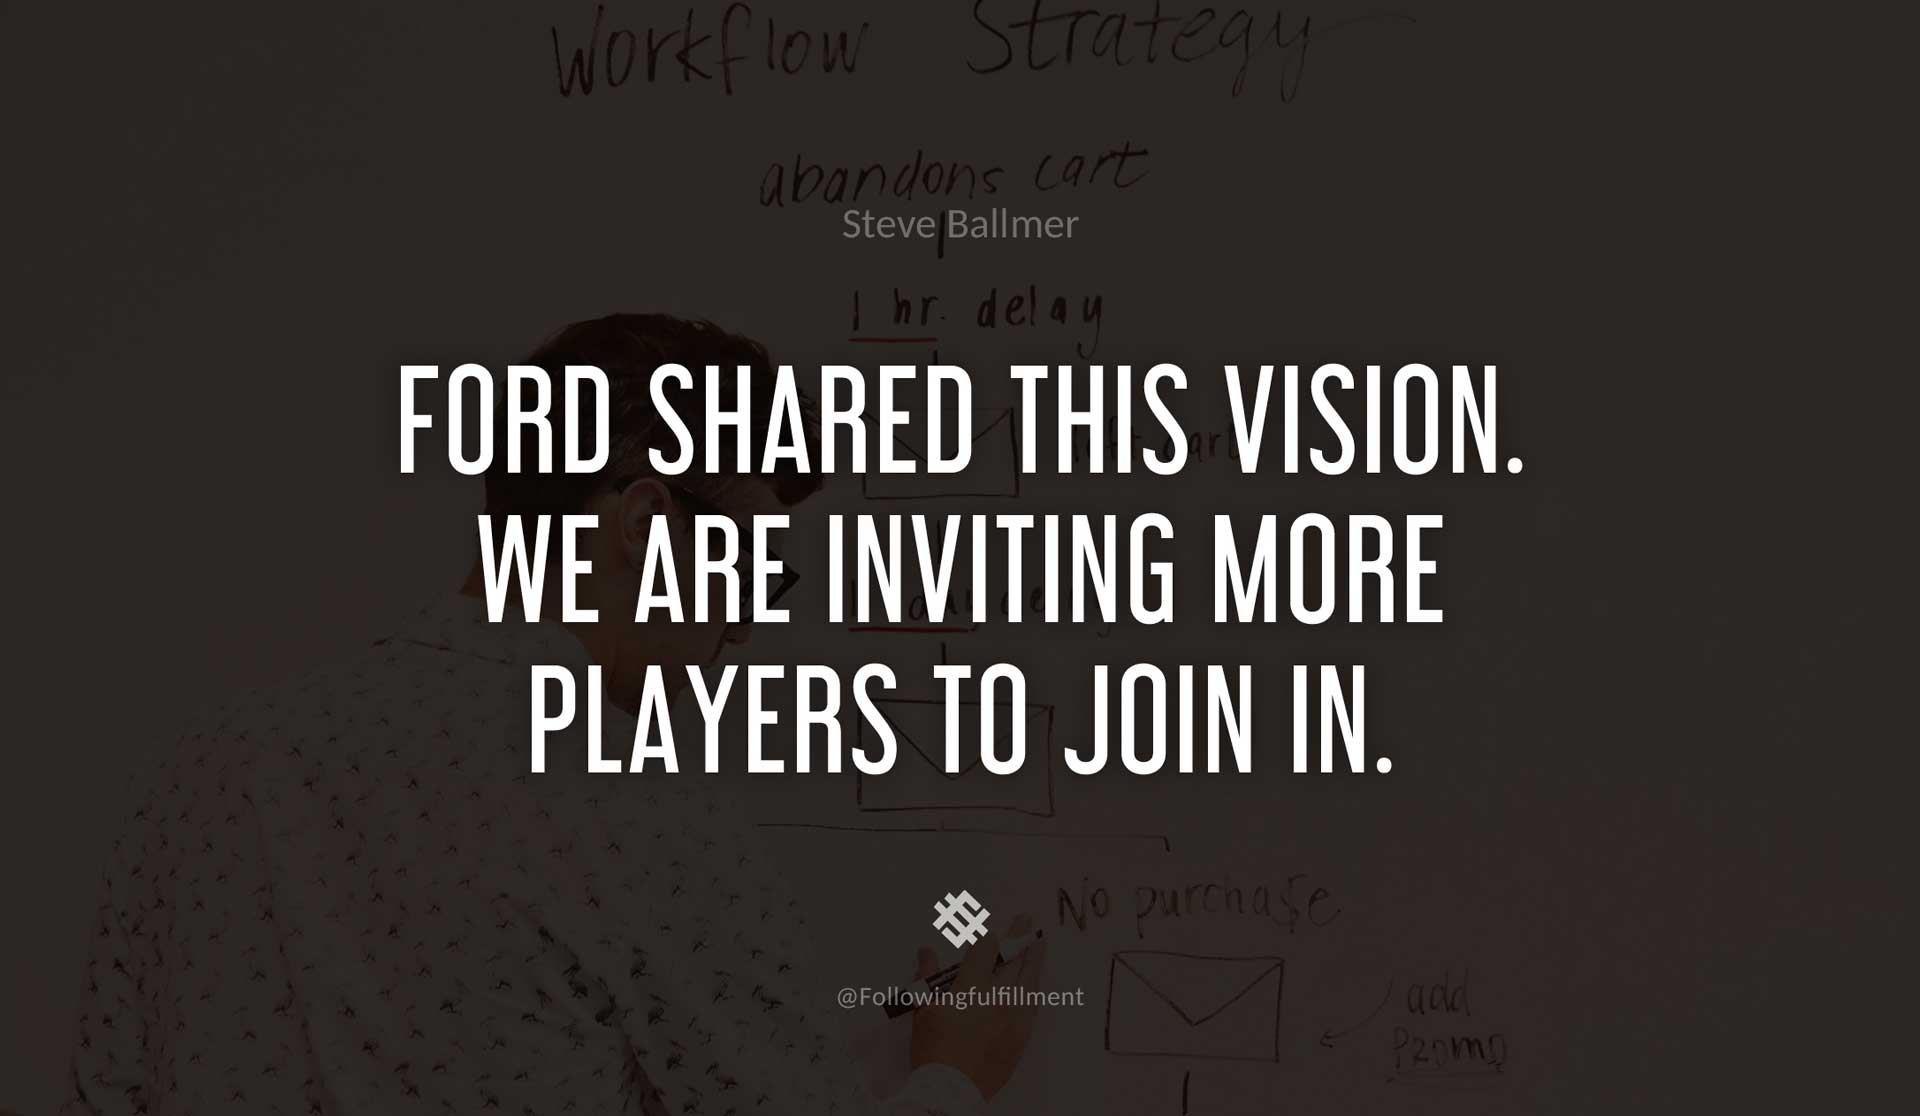 Ford-shared-this-vision.-We-are-inviting-more-players-to-join-in.-STEVE-BALLMER-Quote.jpg